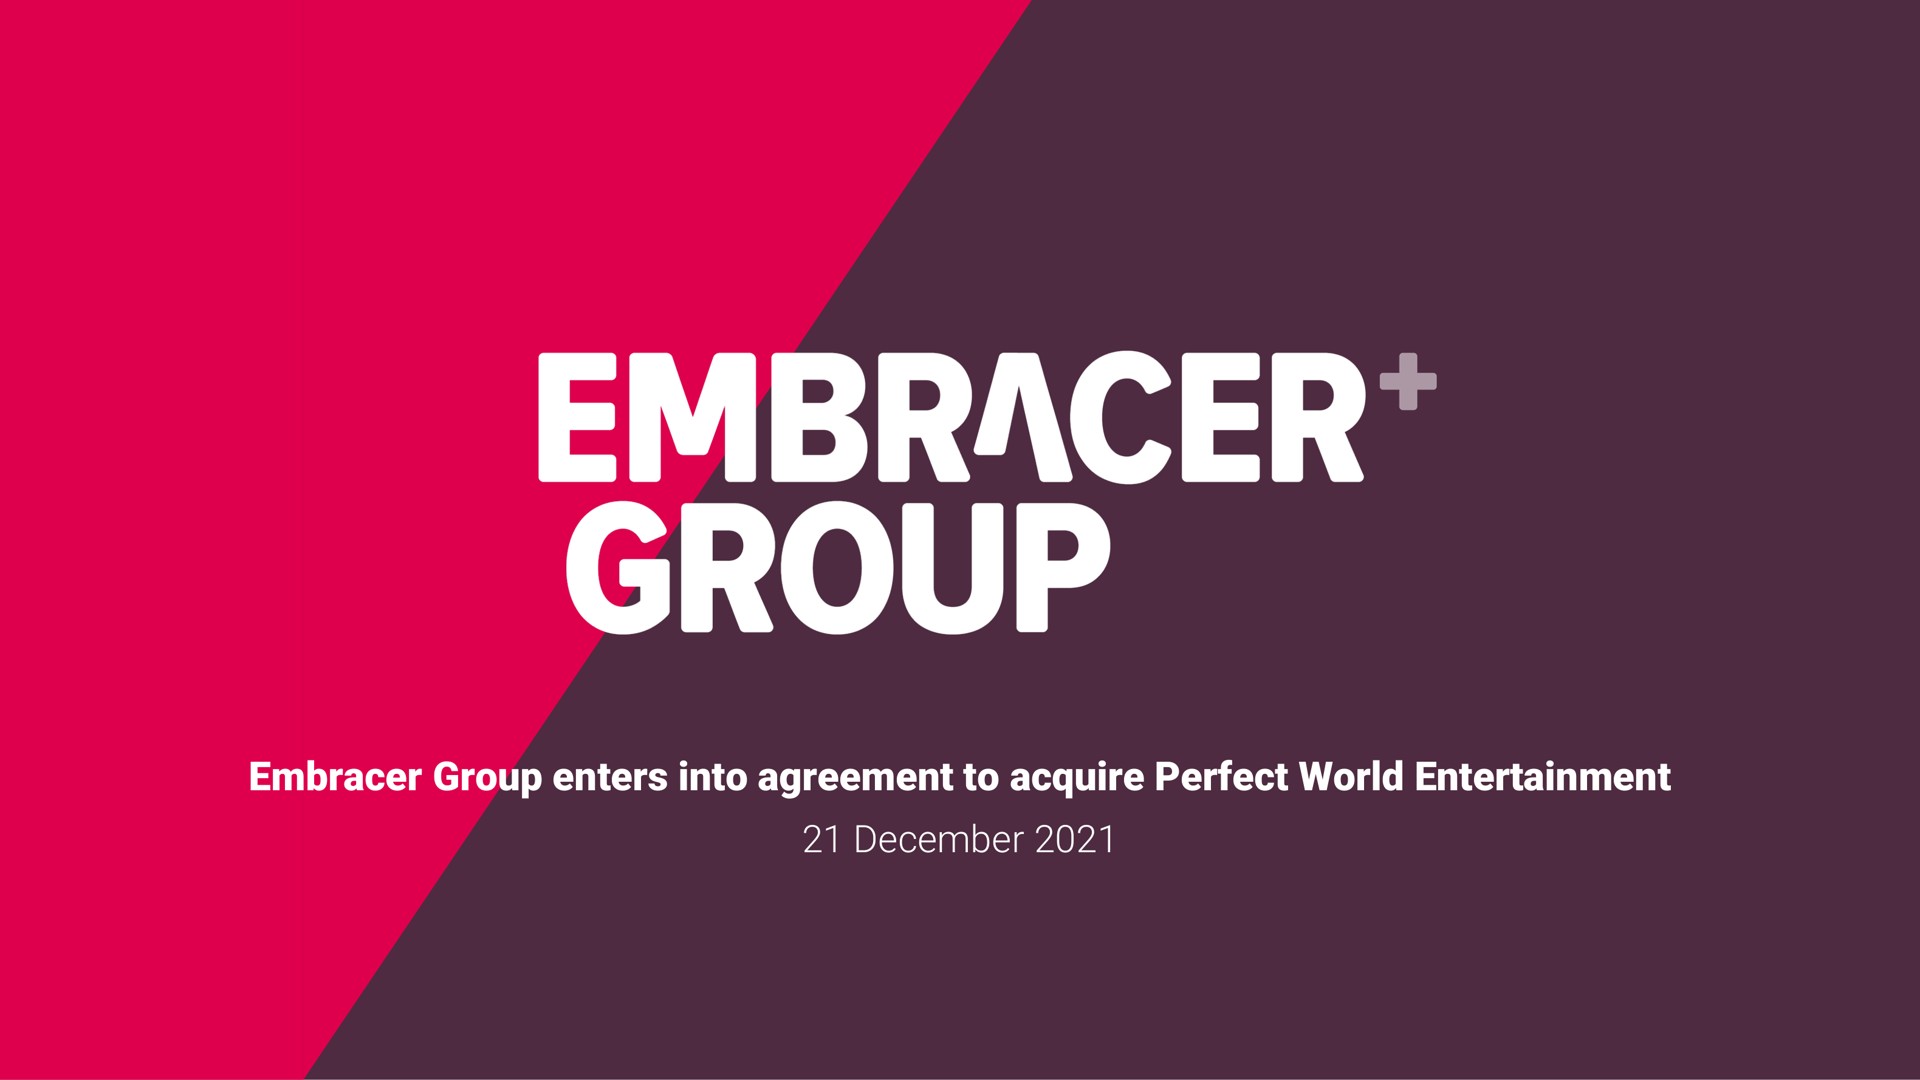 embracer group embracer group enters into agreement to acquire perfect world entertainment | Embracer Group